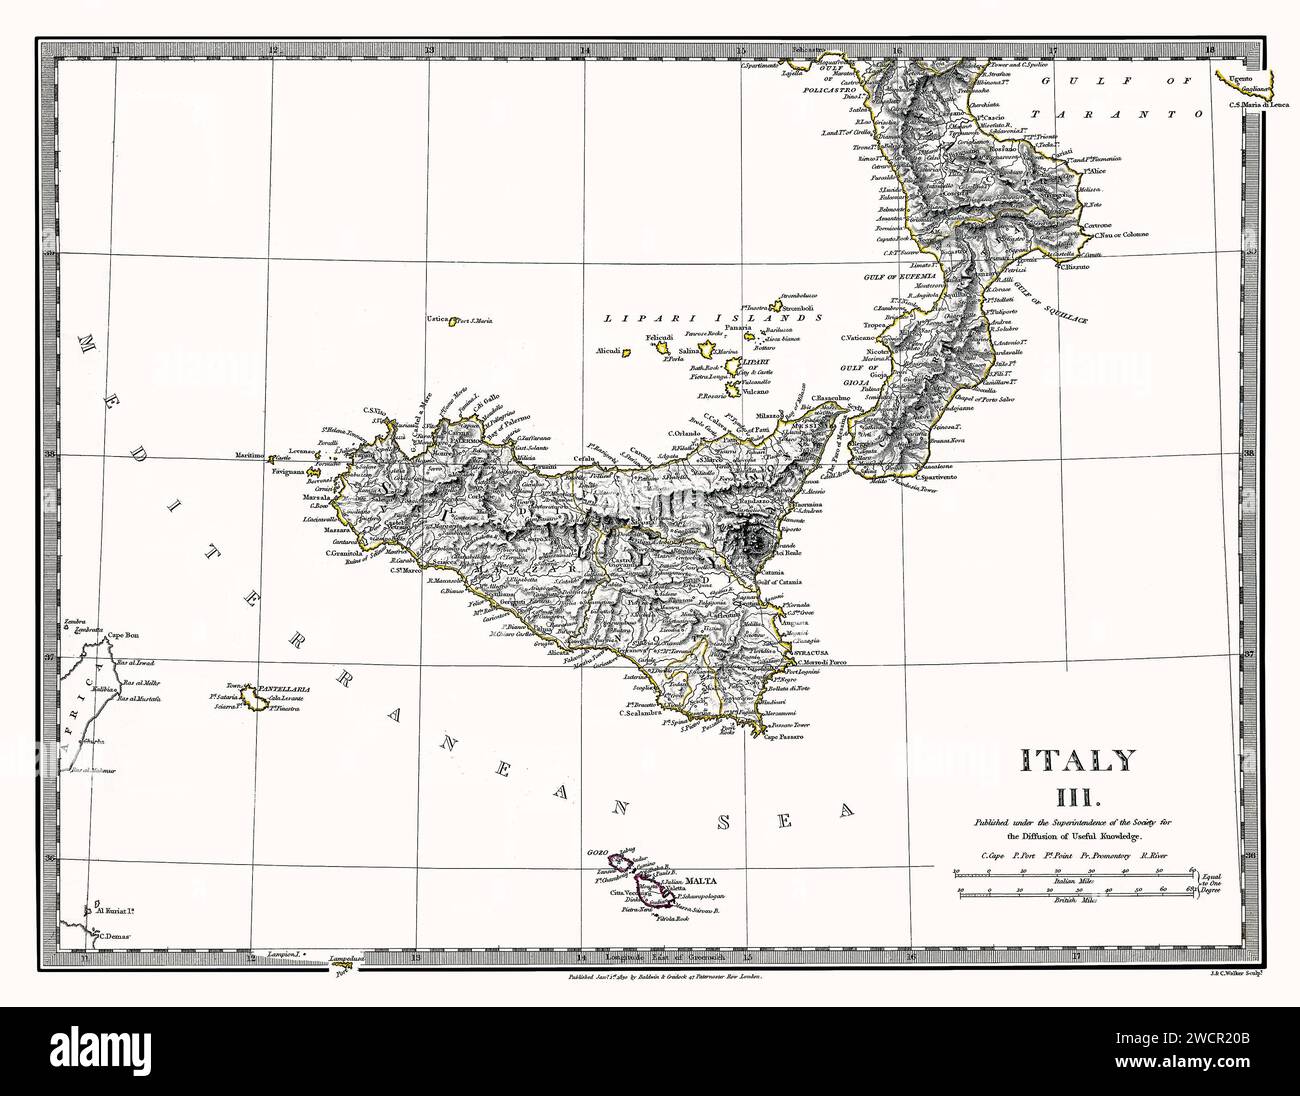 Sicily Italy Map 1844. This is a digitally enhanced, restored reproduction of a beautifully detailed antique map of Sicily and Calabria showing many geographical details The map was published in 1844. This is one of a series of maps published by the Society for the Diffusion of Useful Knowledge, a British organization. Stock Photo